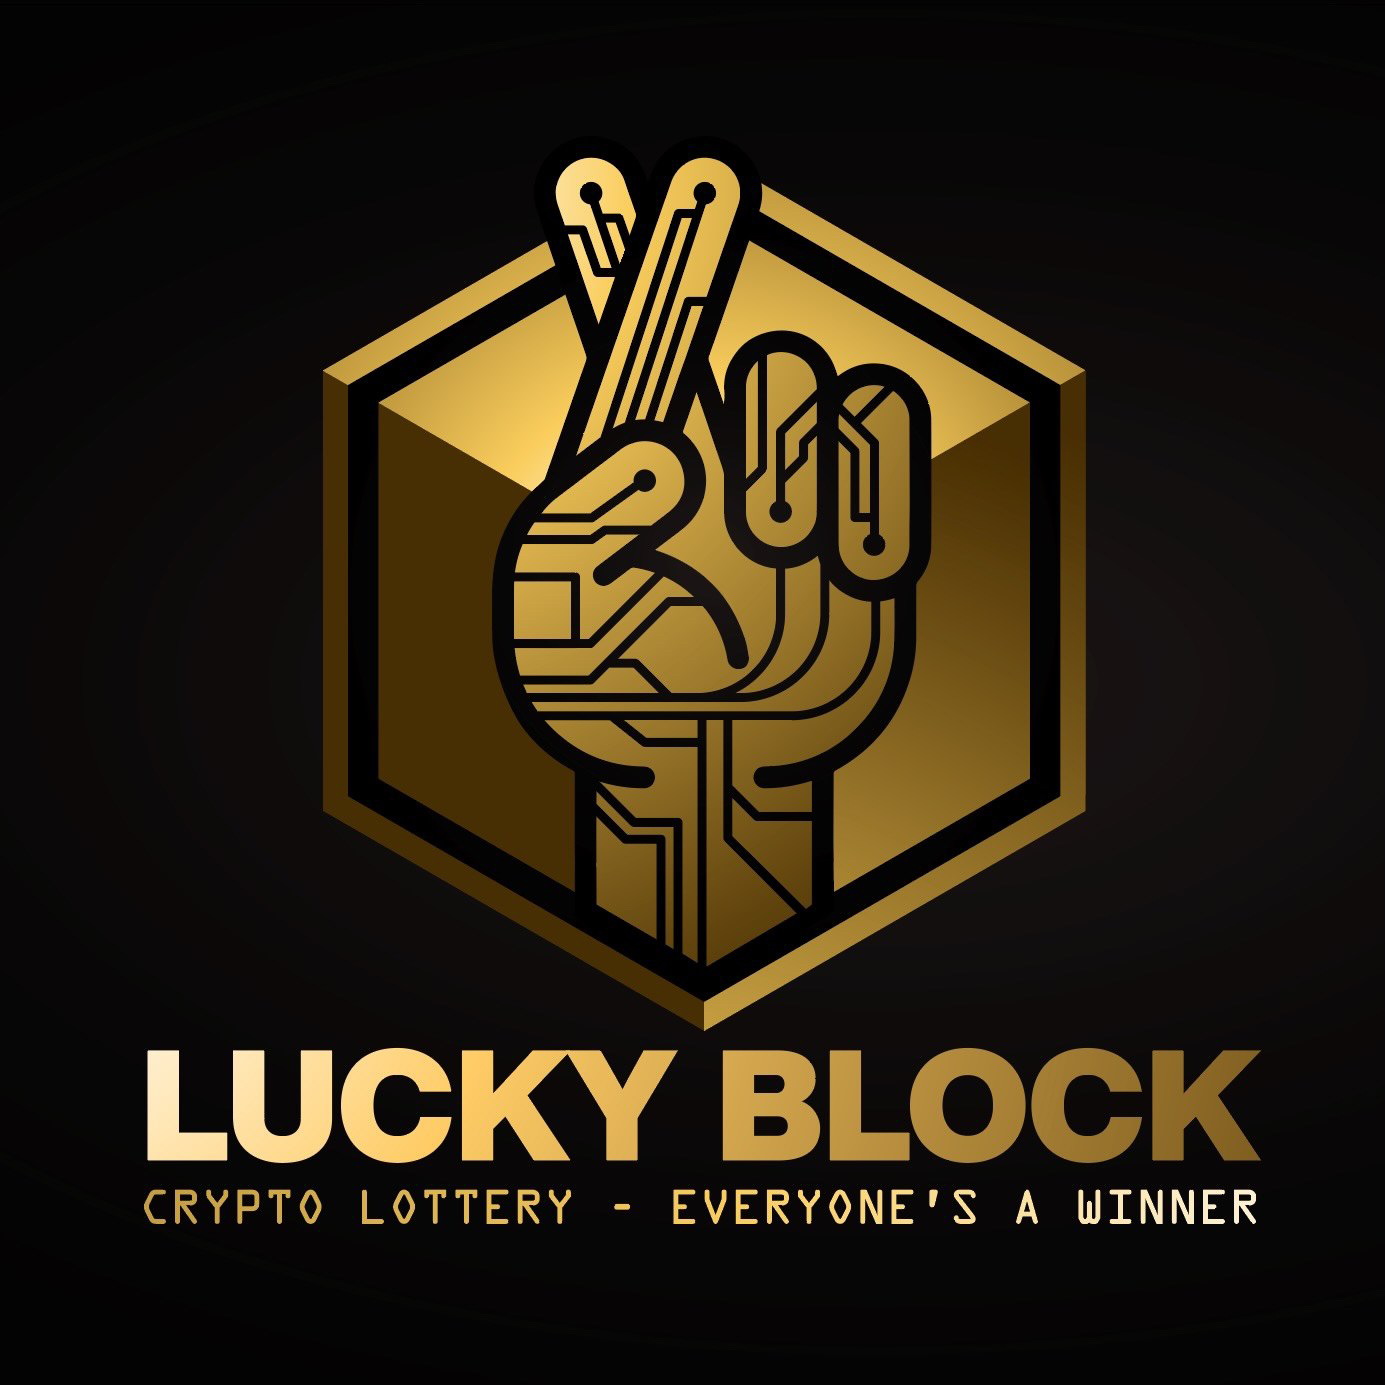 Crypto lottery Lucky Block smashed $140 million valuation just two days after launch, The Manc